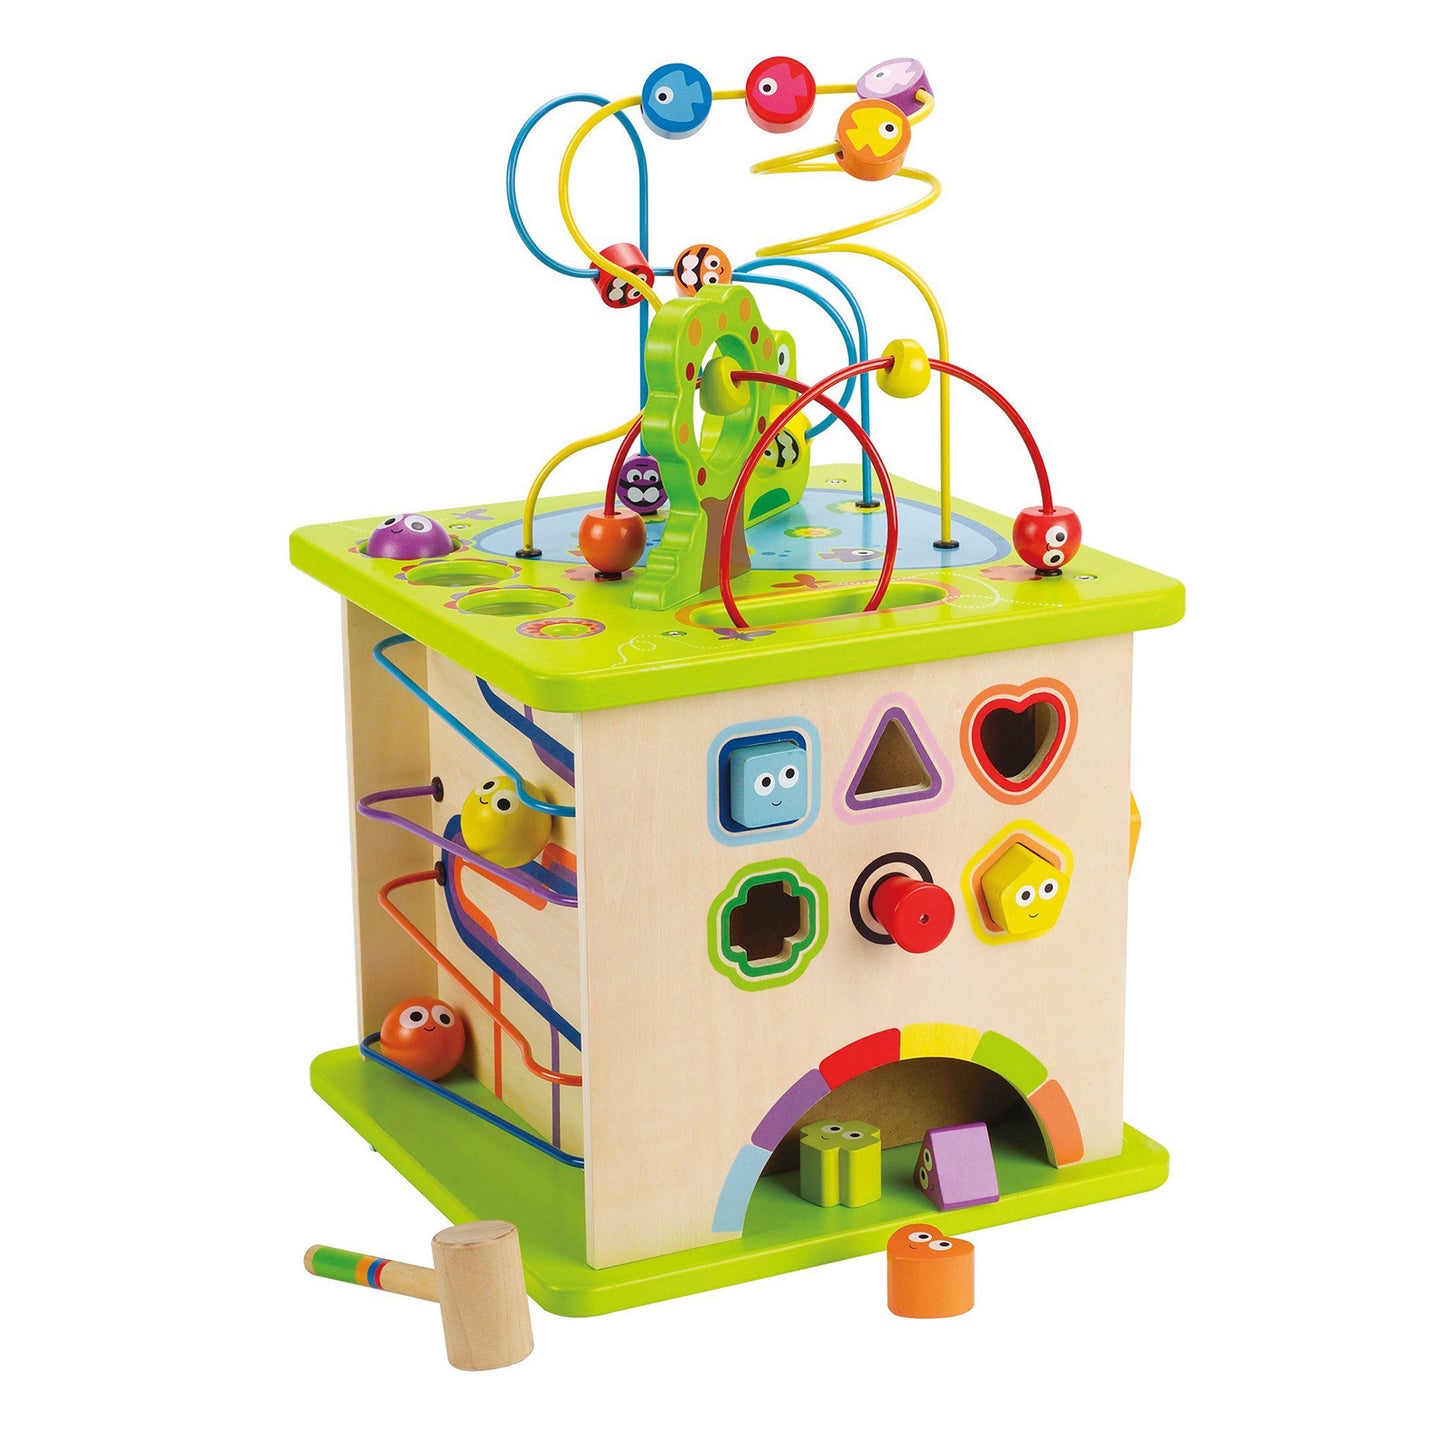 Hape - Country Critters Play Cube